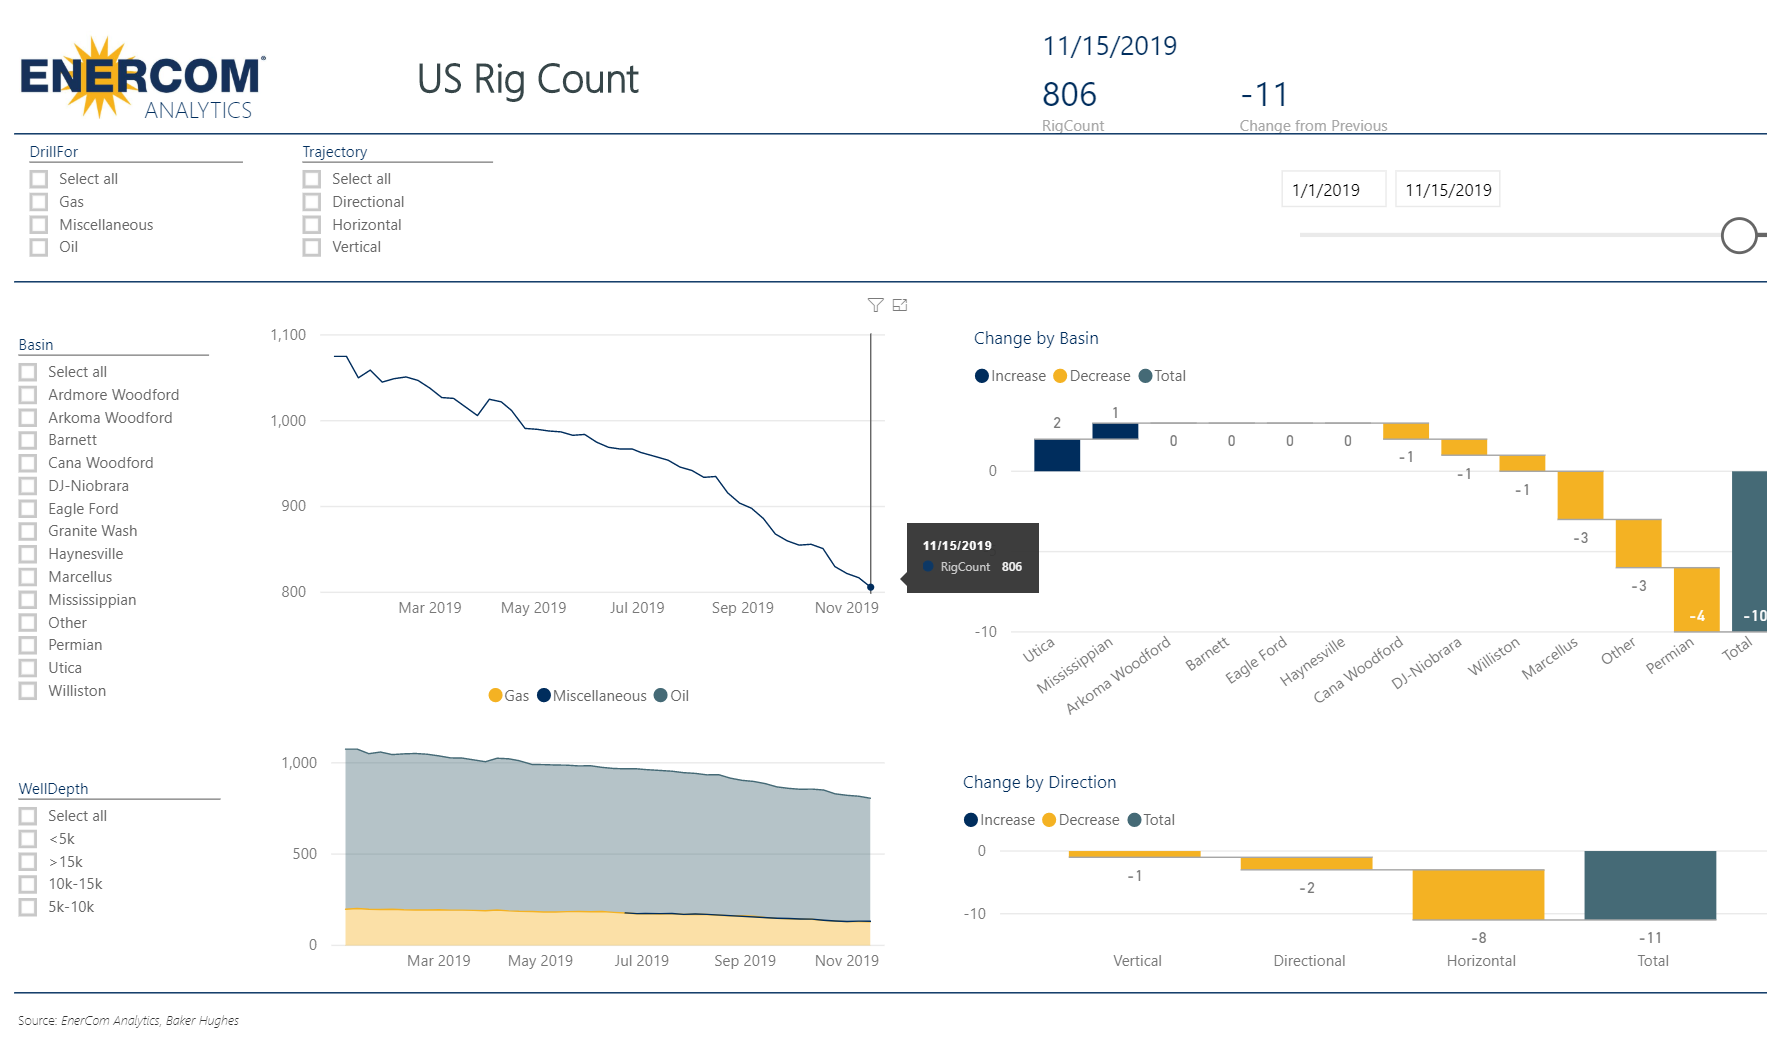 U.S. Rig Count drops 11, down to 806 rigs - oil and gas 360